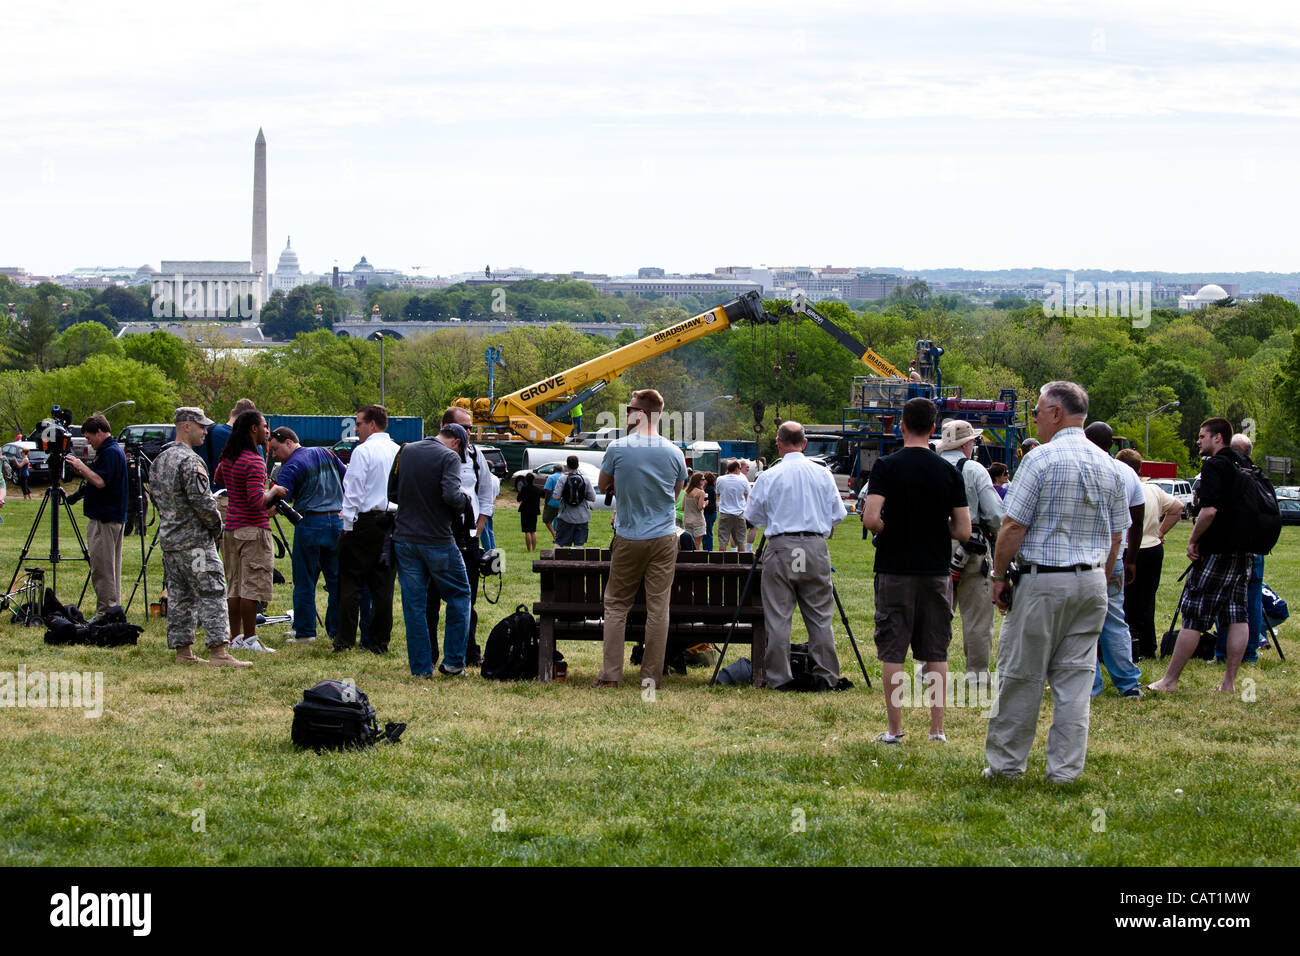 April 17, 2012 - Washington, DC, U.S. - Space shuttle Discovery, mounted on the Shuttle Carrier Aircraft, has flown over the Washington, D.C. area. Onlookers are watching the final flight and taking pictures. (Credit Image: © Dasha Rosato) Stock Photo